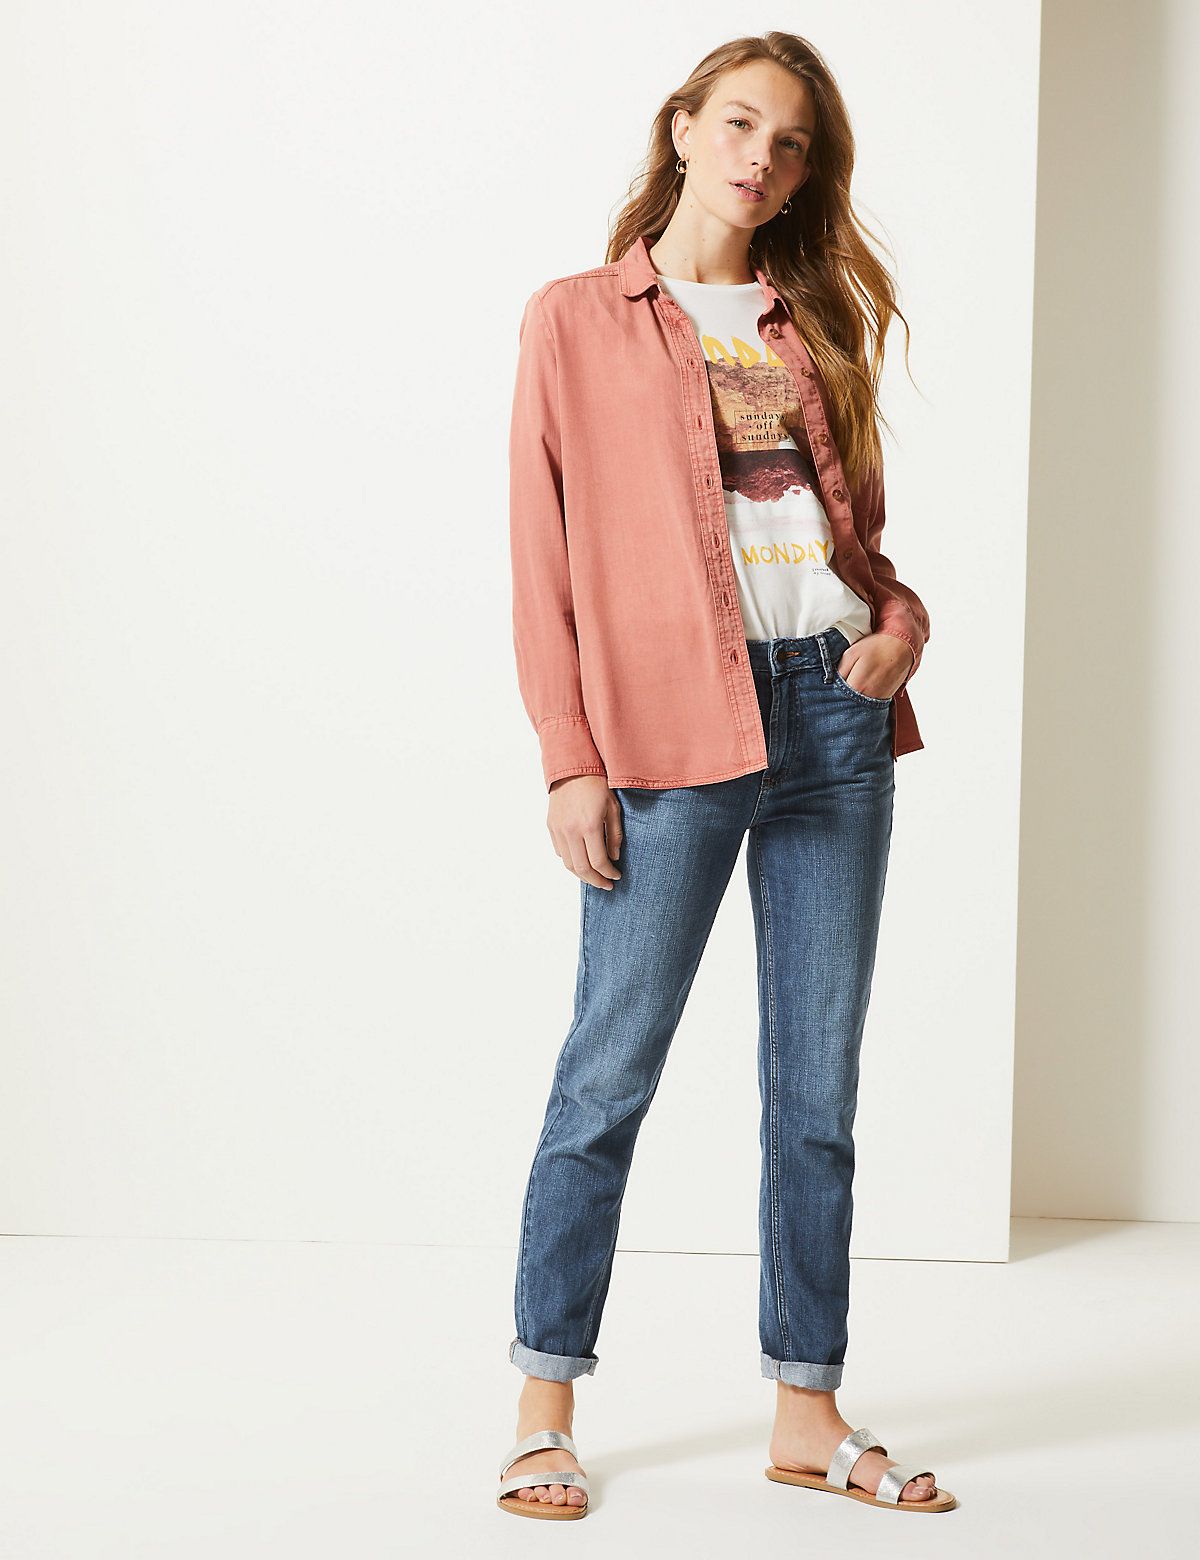 relaxed slim jeans m&s